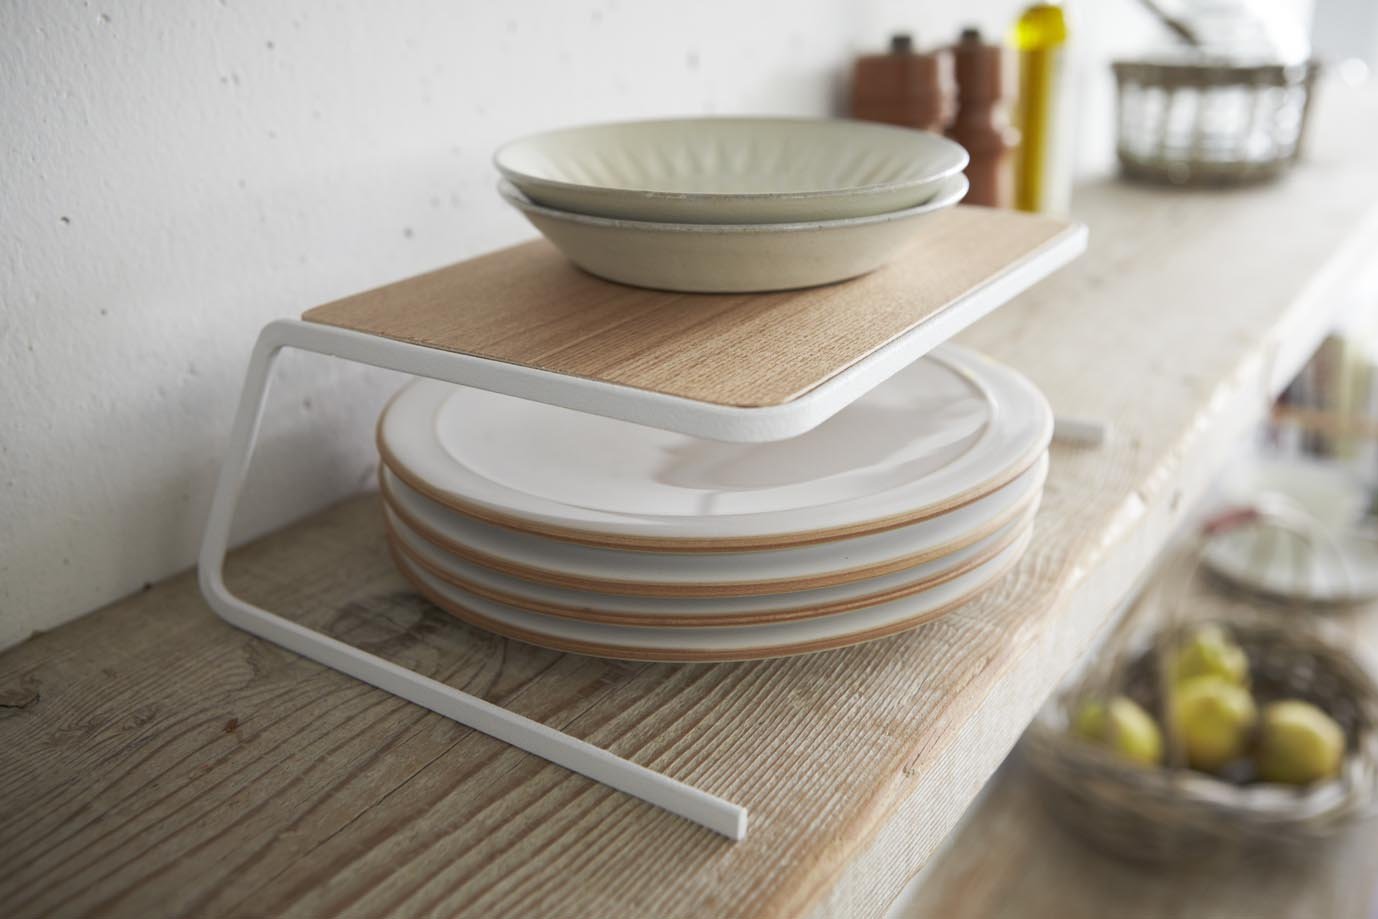 Yamazaki's wooden dish riser with white accents stacked with dishes above and below.